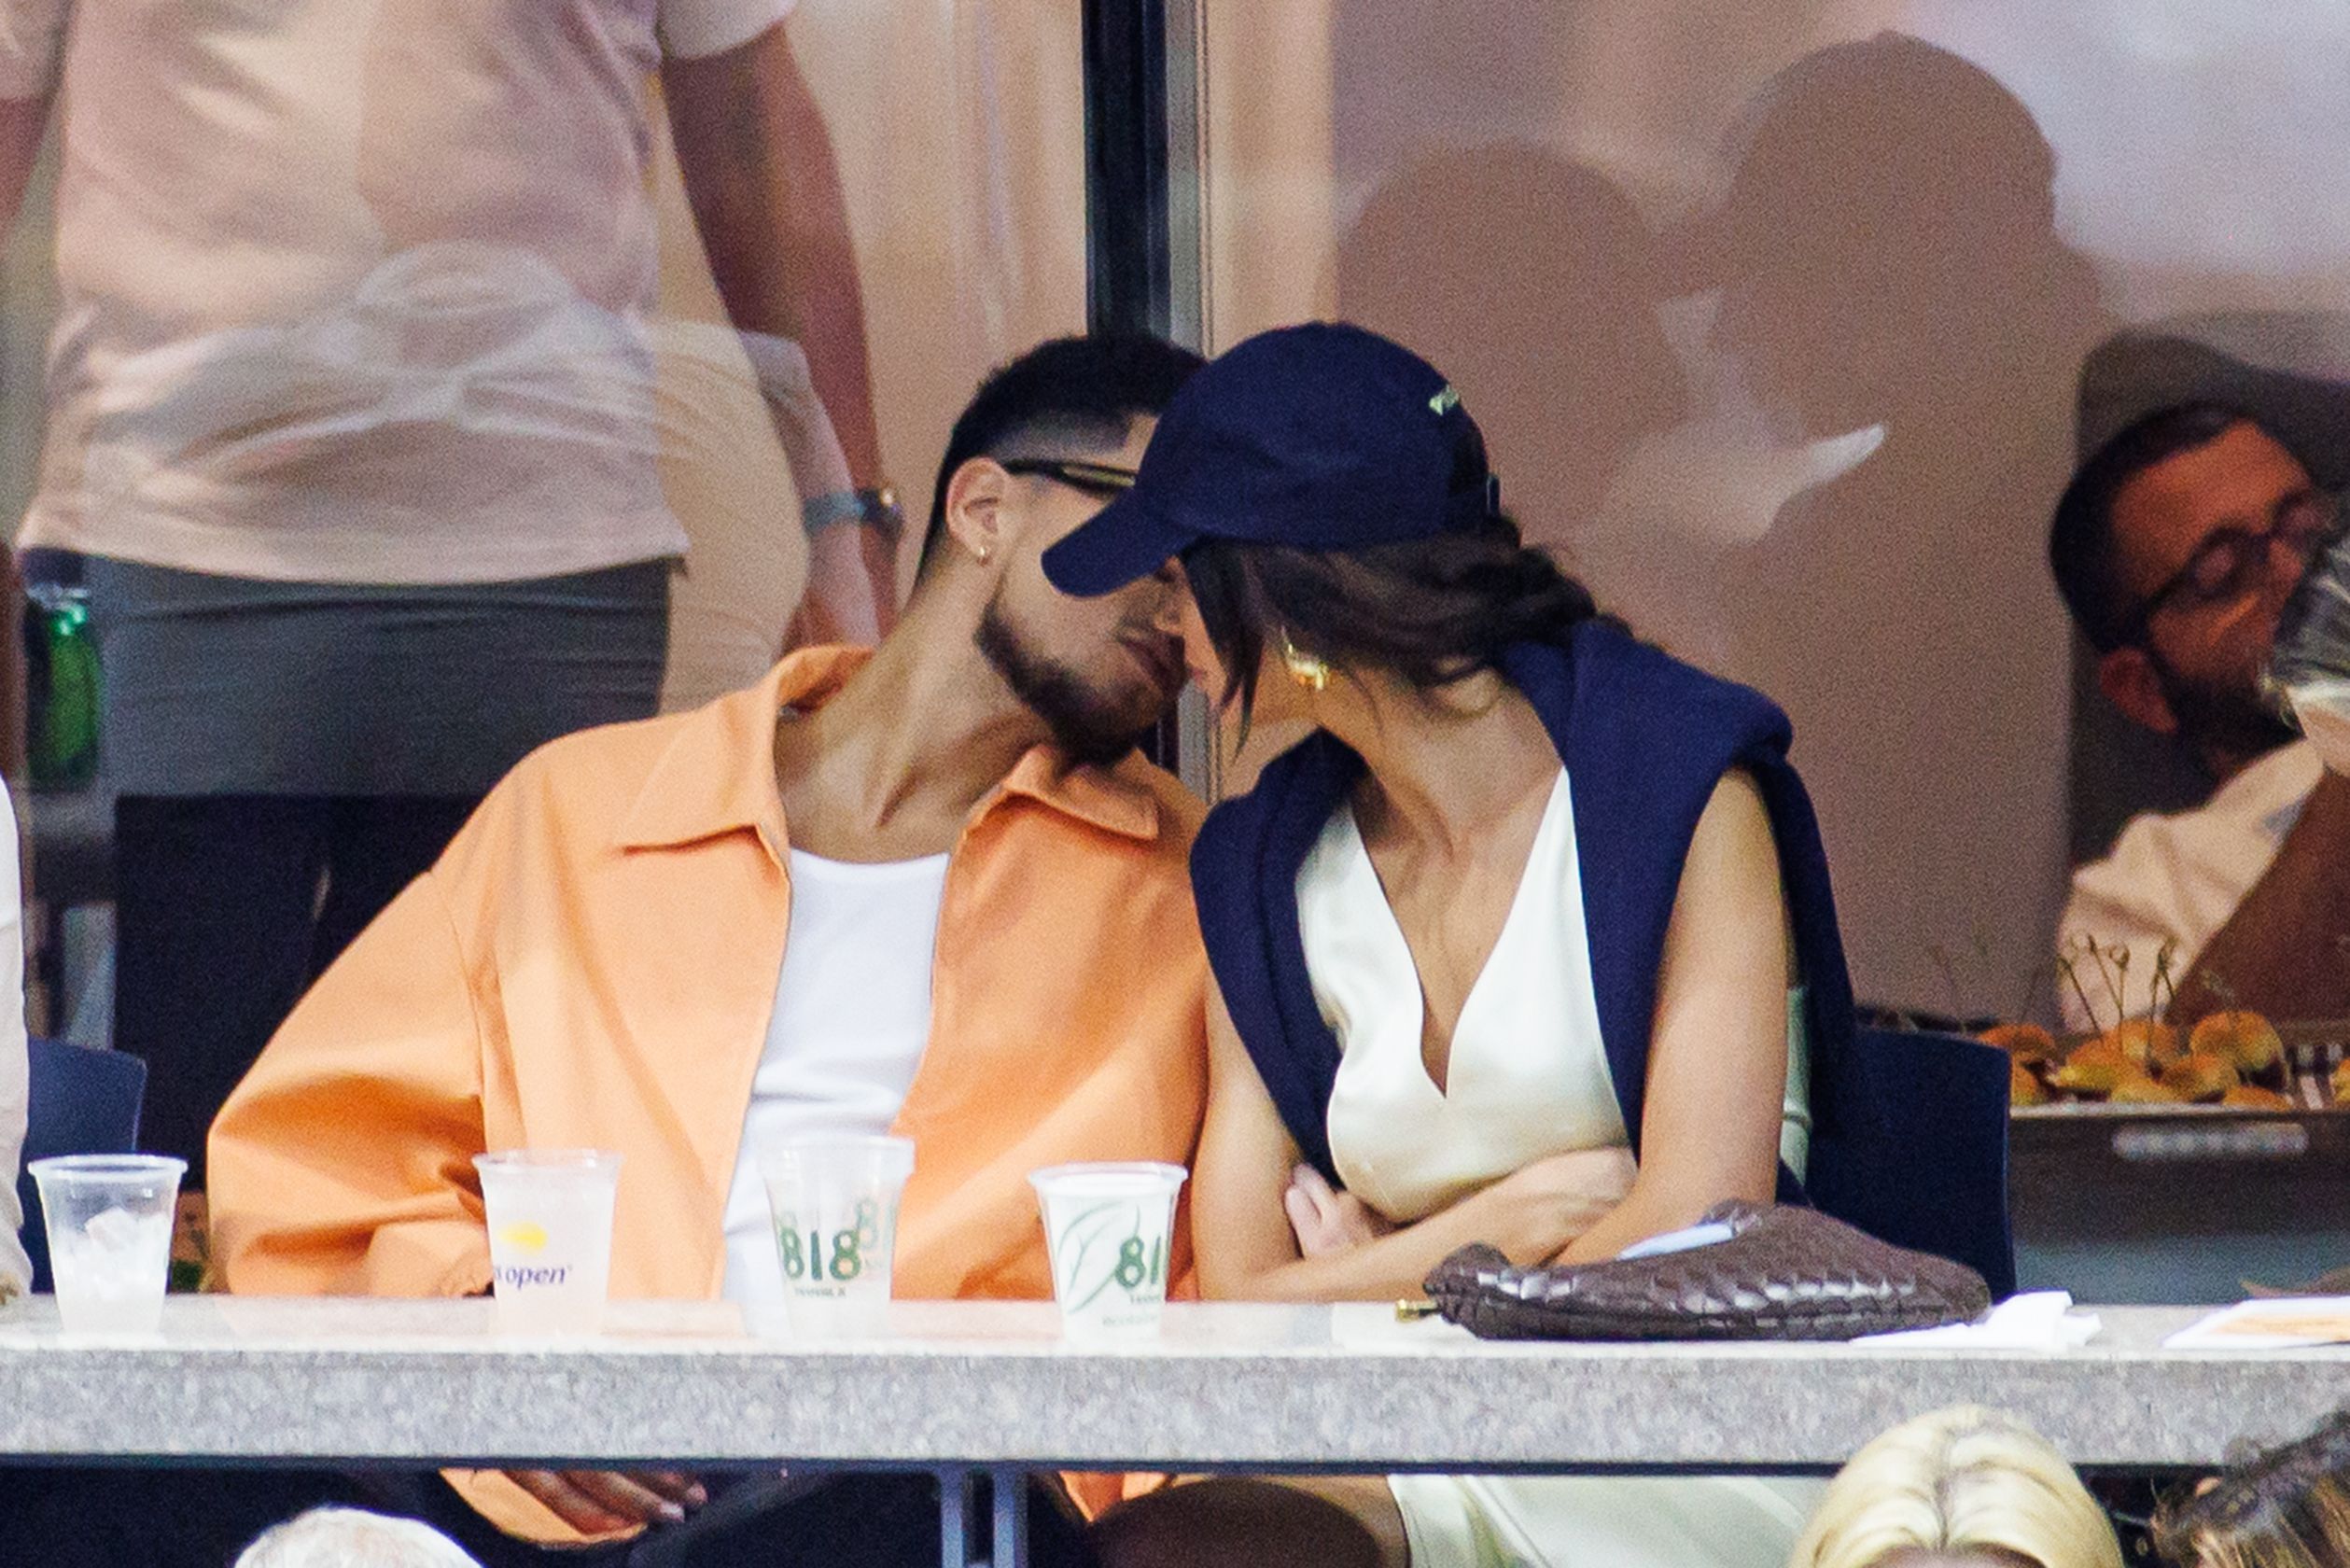 Kendall Jenner and Bad Bunny spotted having 'private time' at NBA